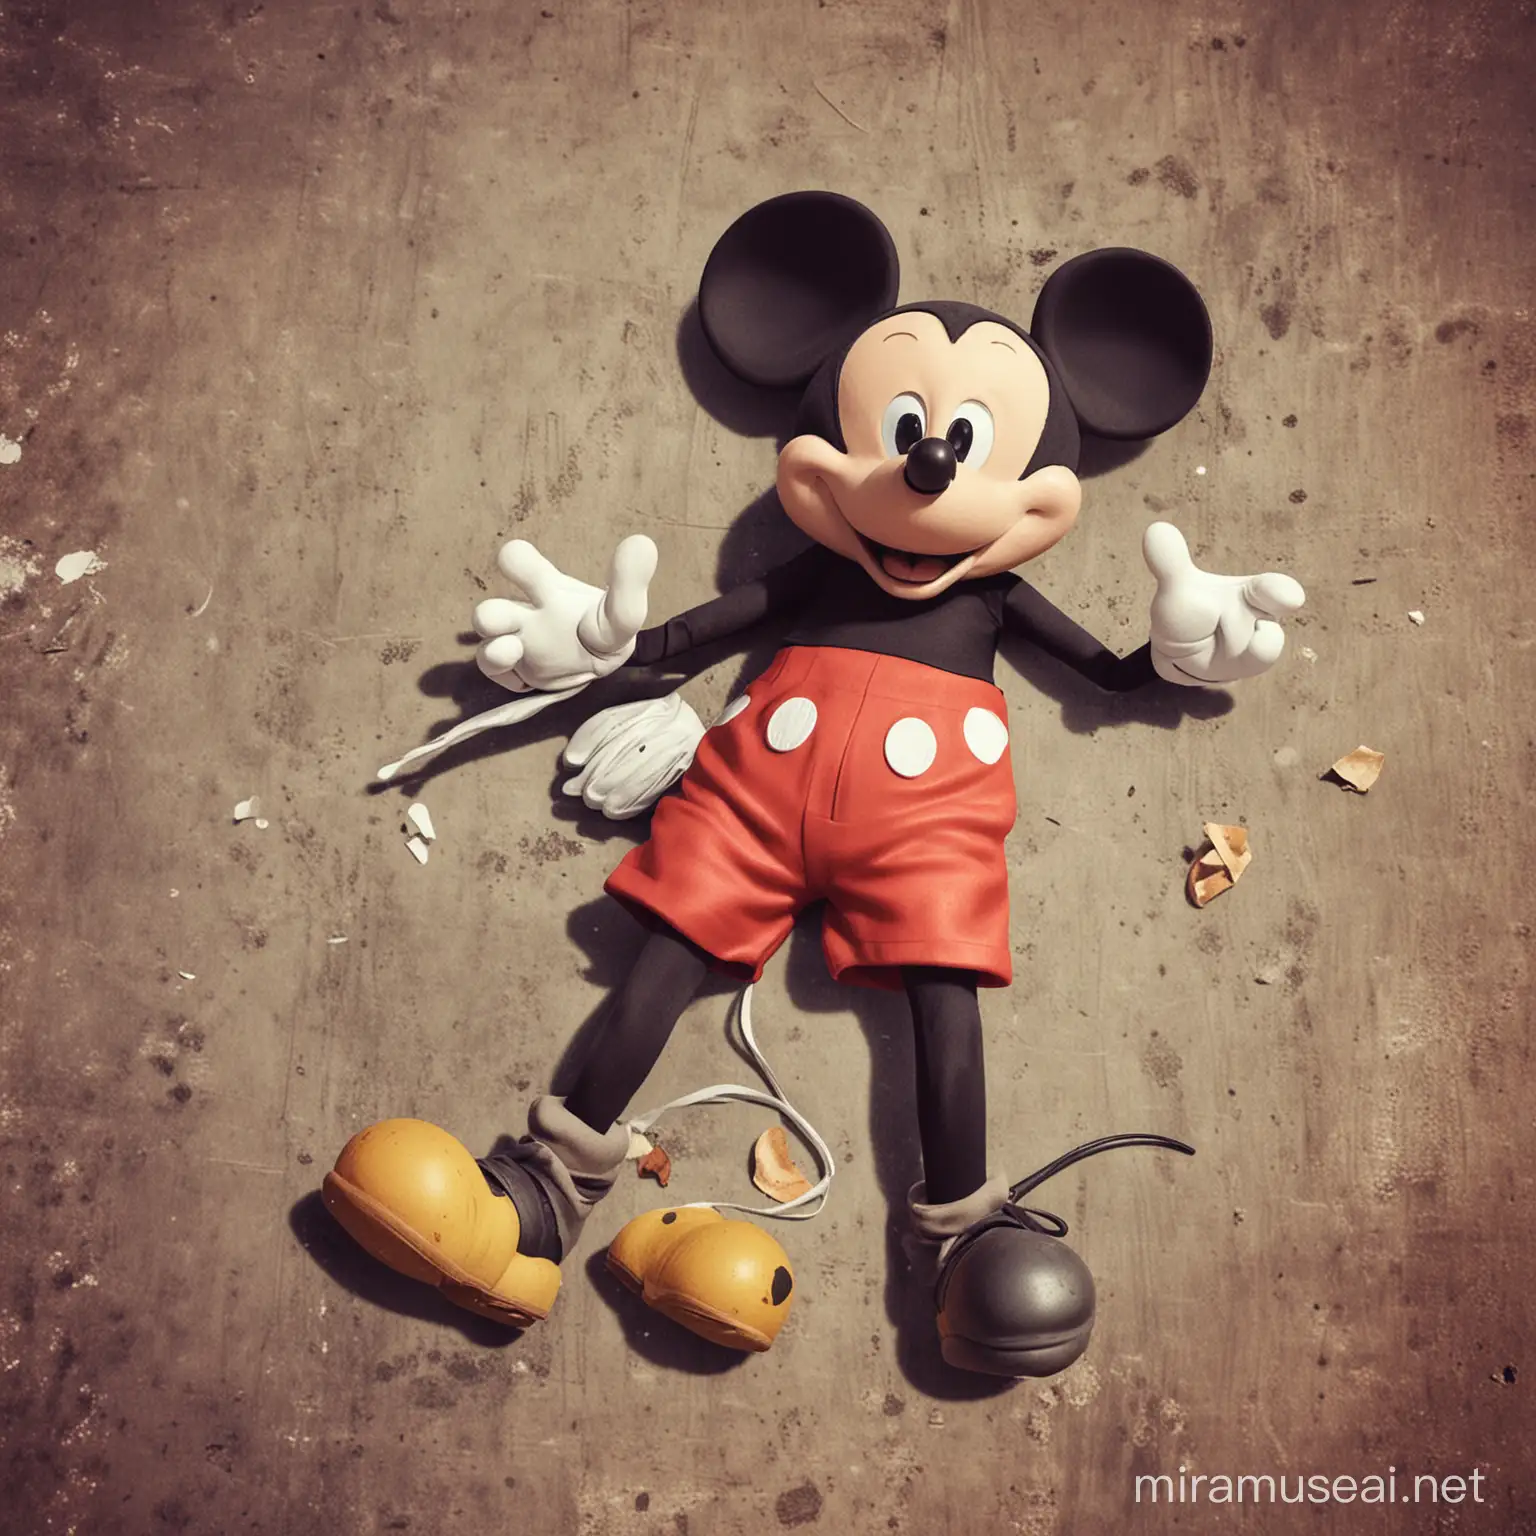 Memorial Tribute Mickey Mouse Remembered in an Artistic Interpretation